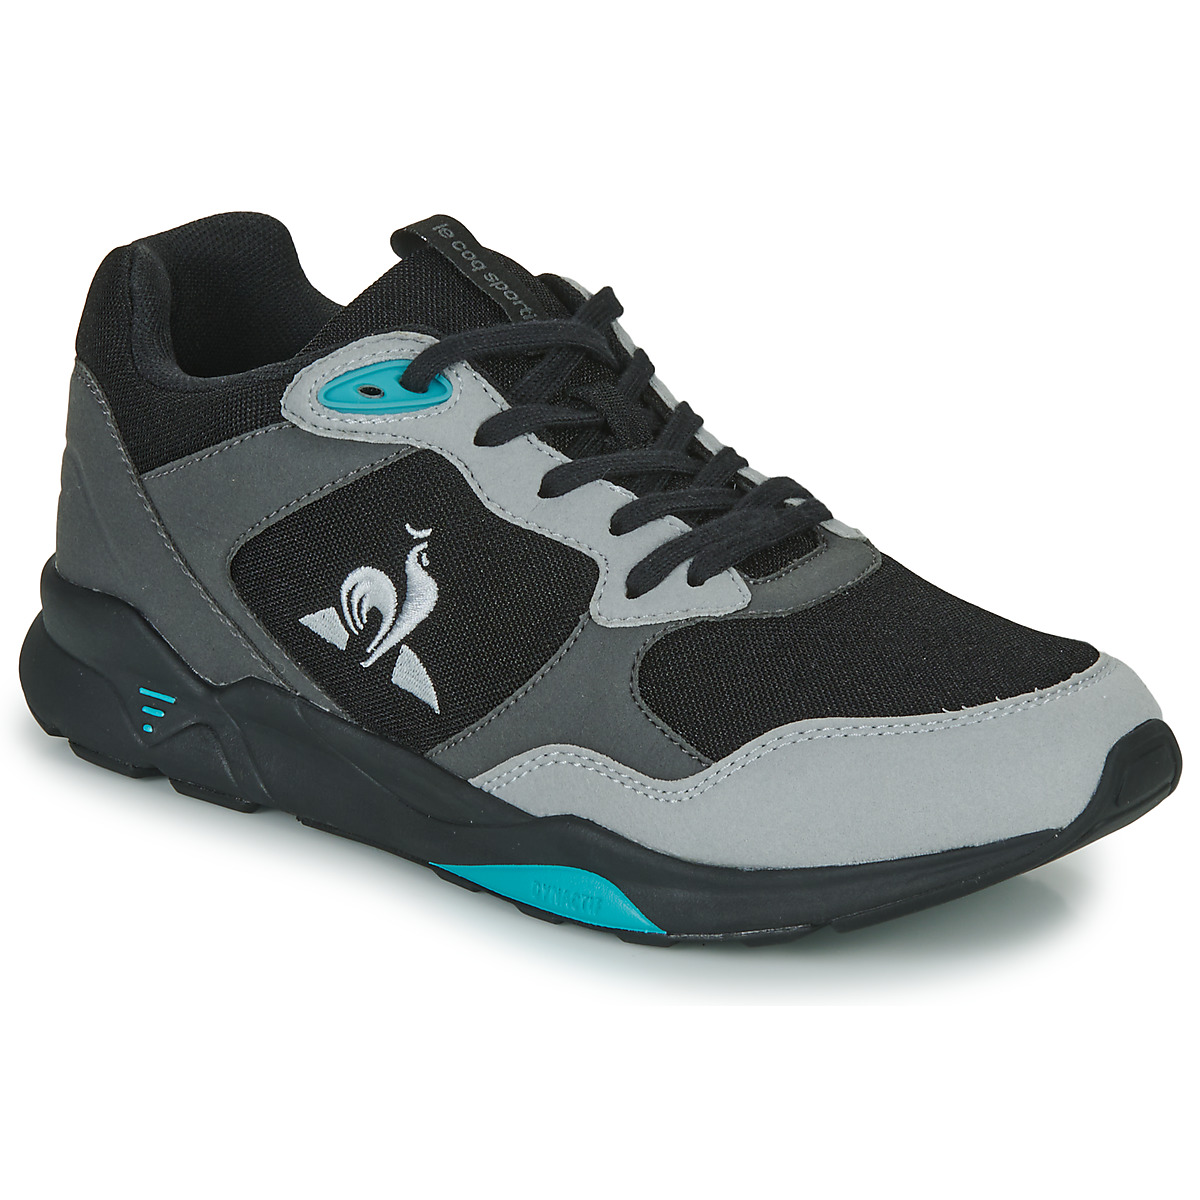 Xαμηλά Sneakers Le Coq Sportif LCS R500 SPORT